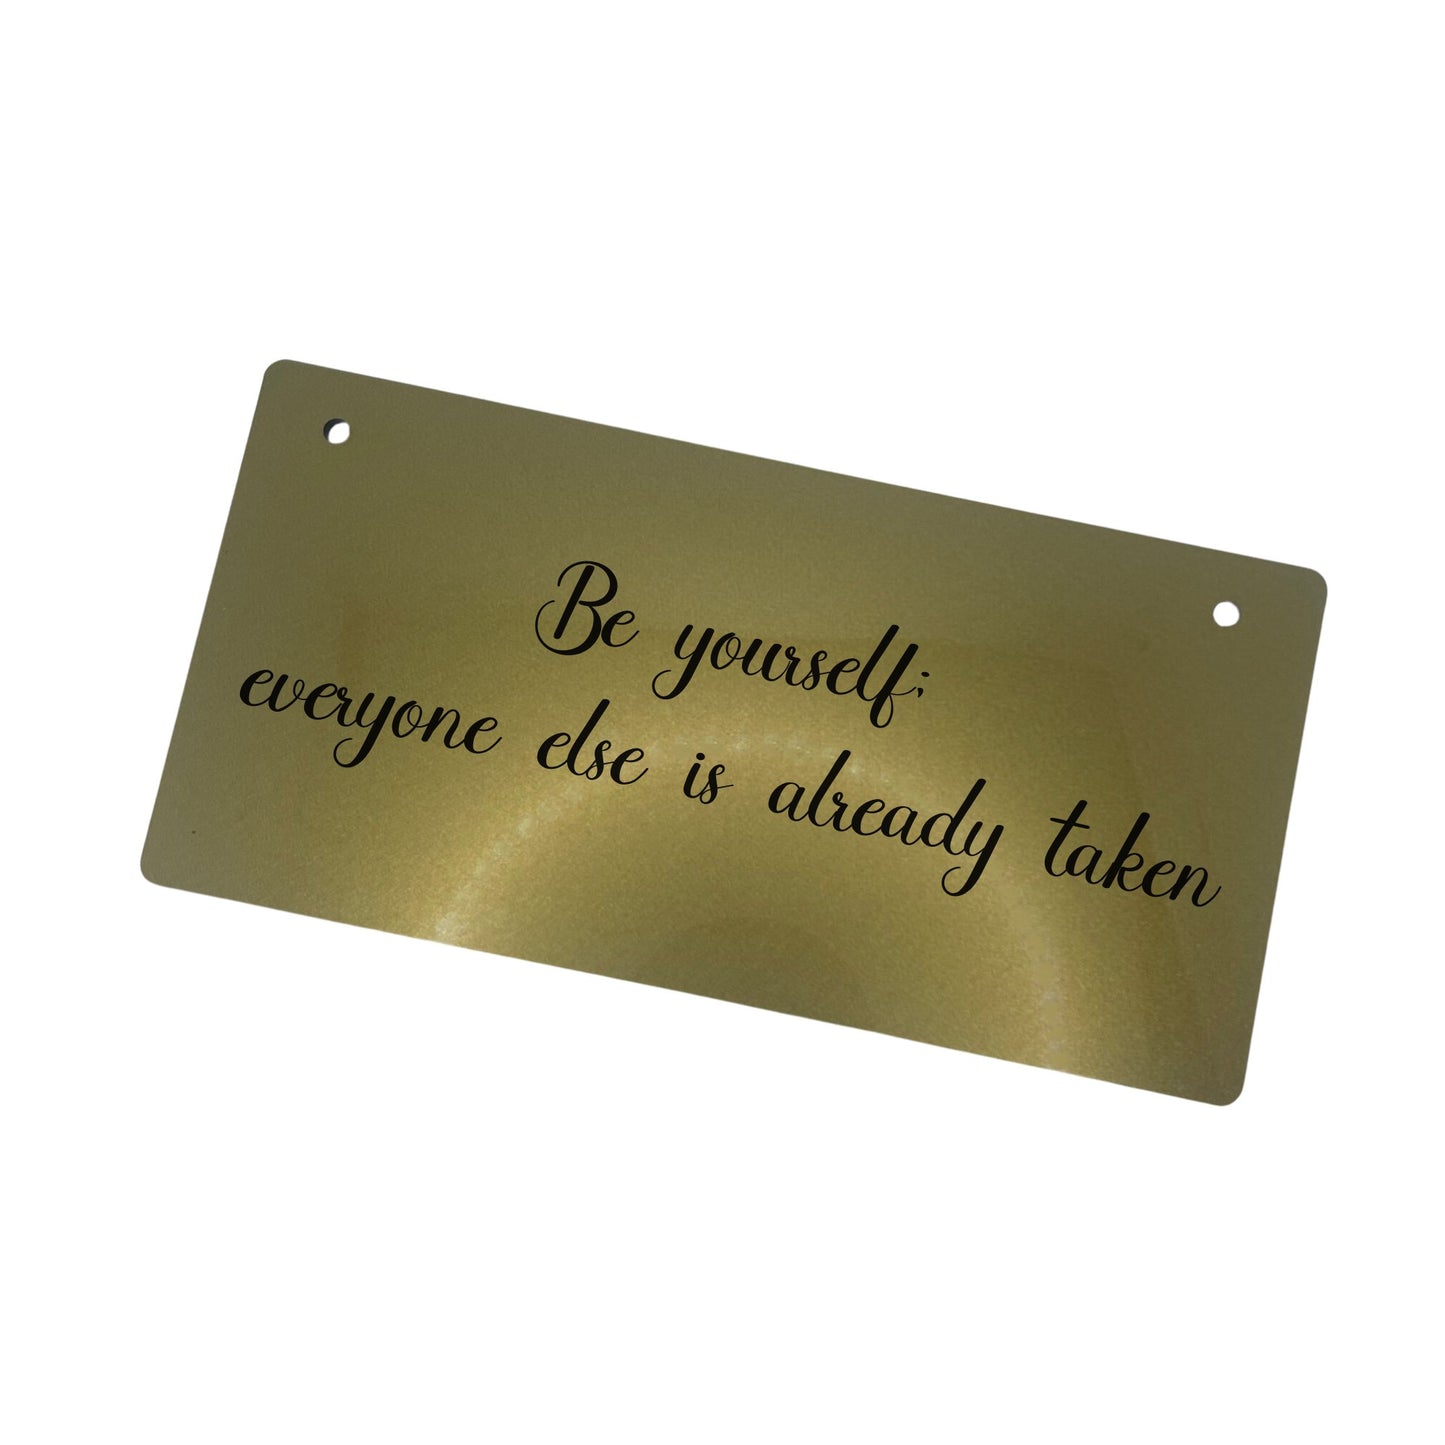 Premium acrylic sign in silver or gold, hung with black twine. Quote: 'Be yourself; everyone else is already taken.' A thoughtful home decor and gift choice.